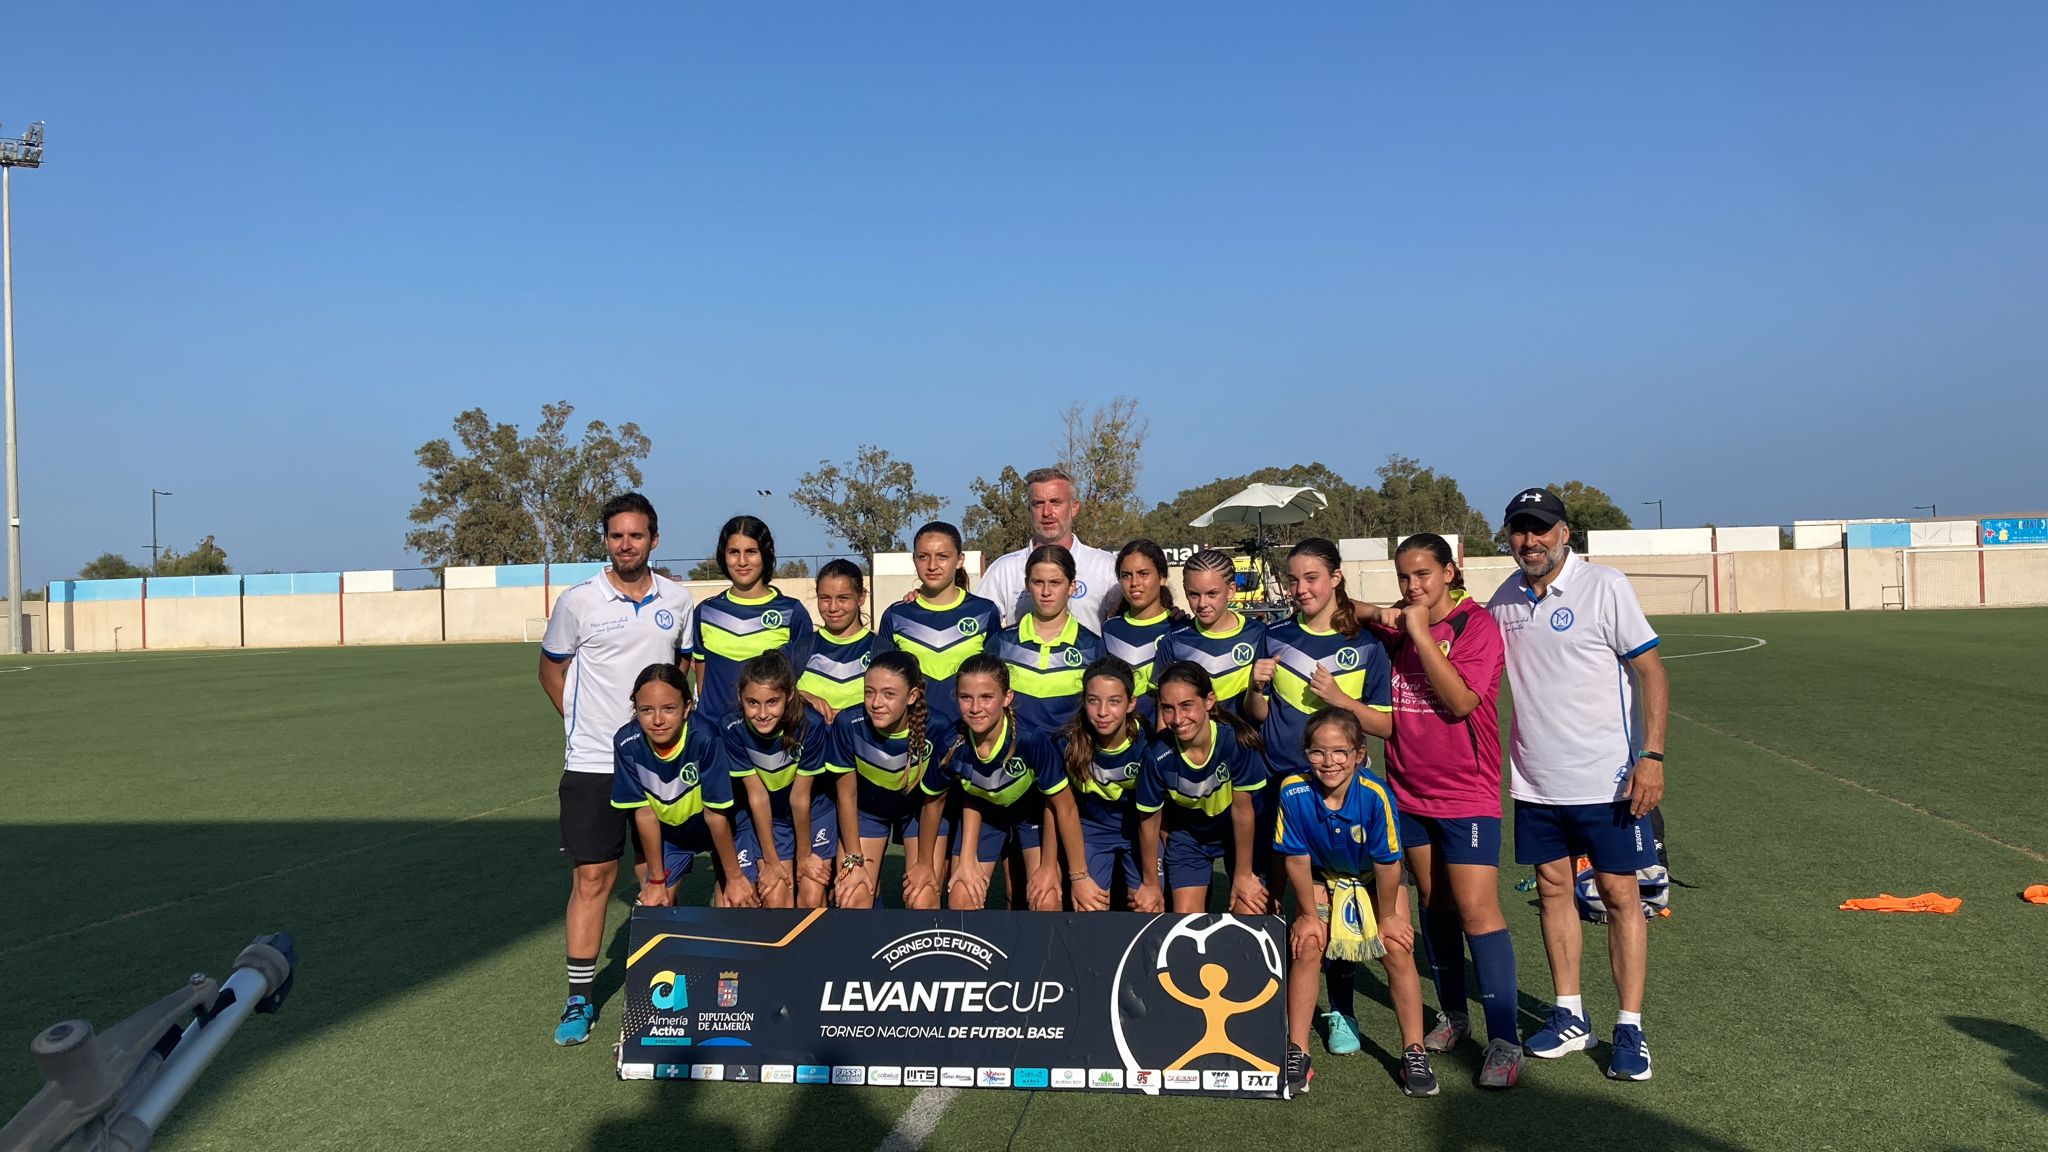 The Levante Cup competition returns to Almería province for another year, with Mojácar as one of the tournament venues. The competition which began this May with the women will continue throughout June.